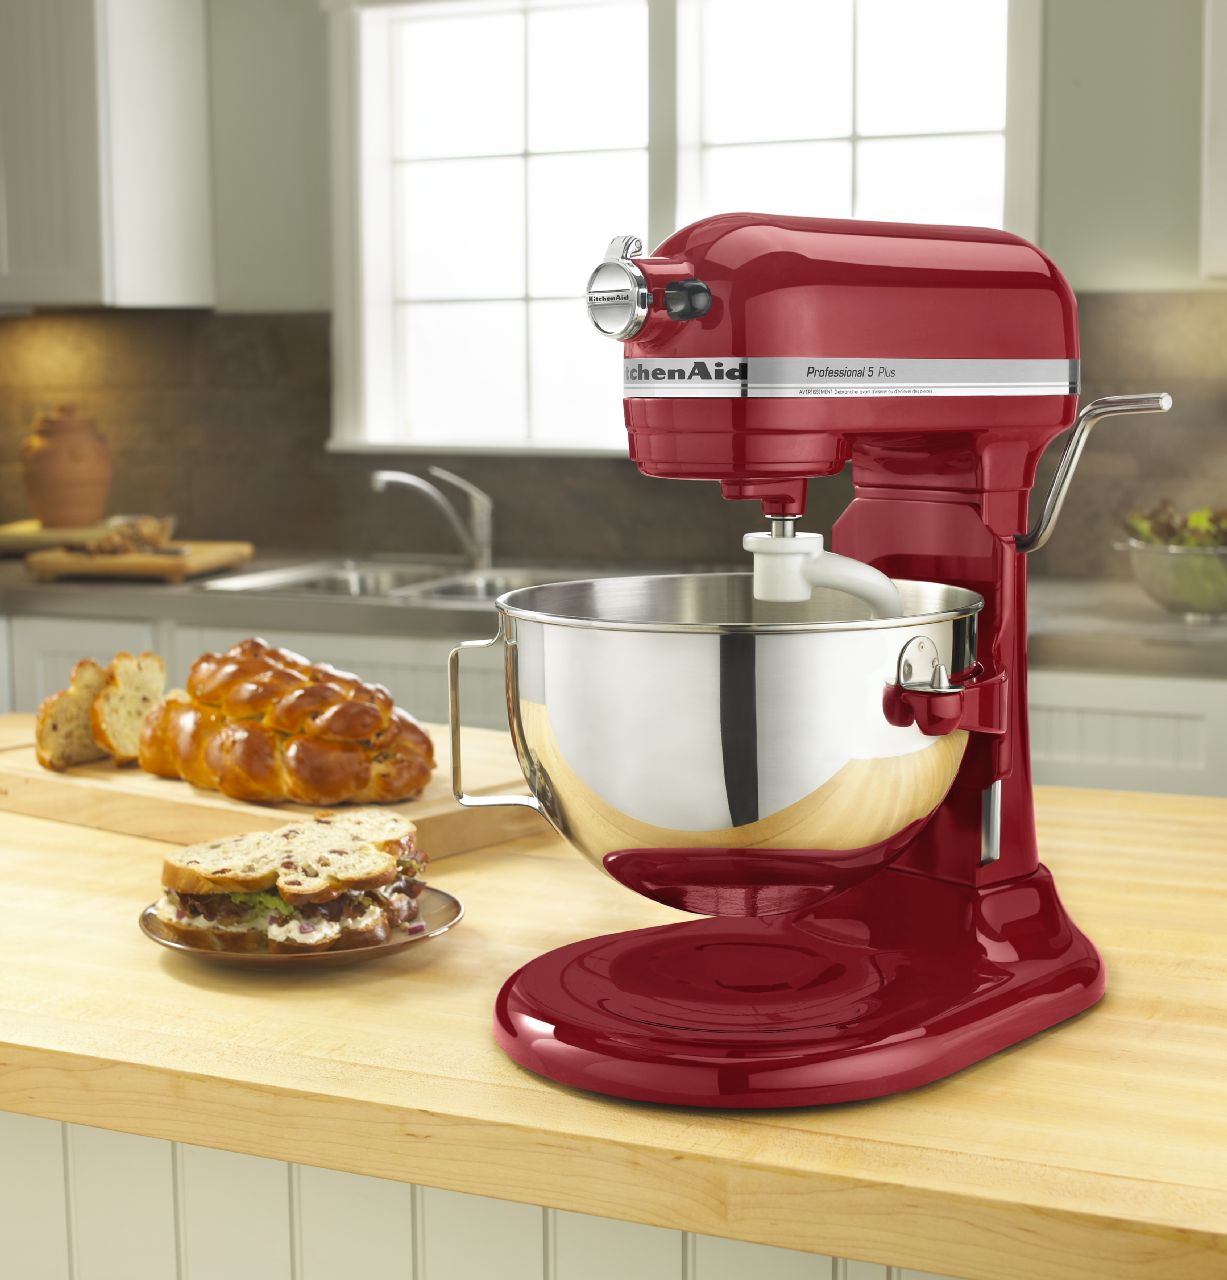 KitchenAid Professional 5 Plus Series 5 Qt. Stand Mixer - Empire Red - image 4 of 5